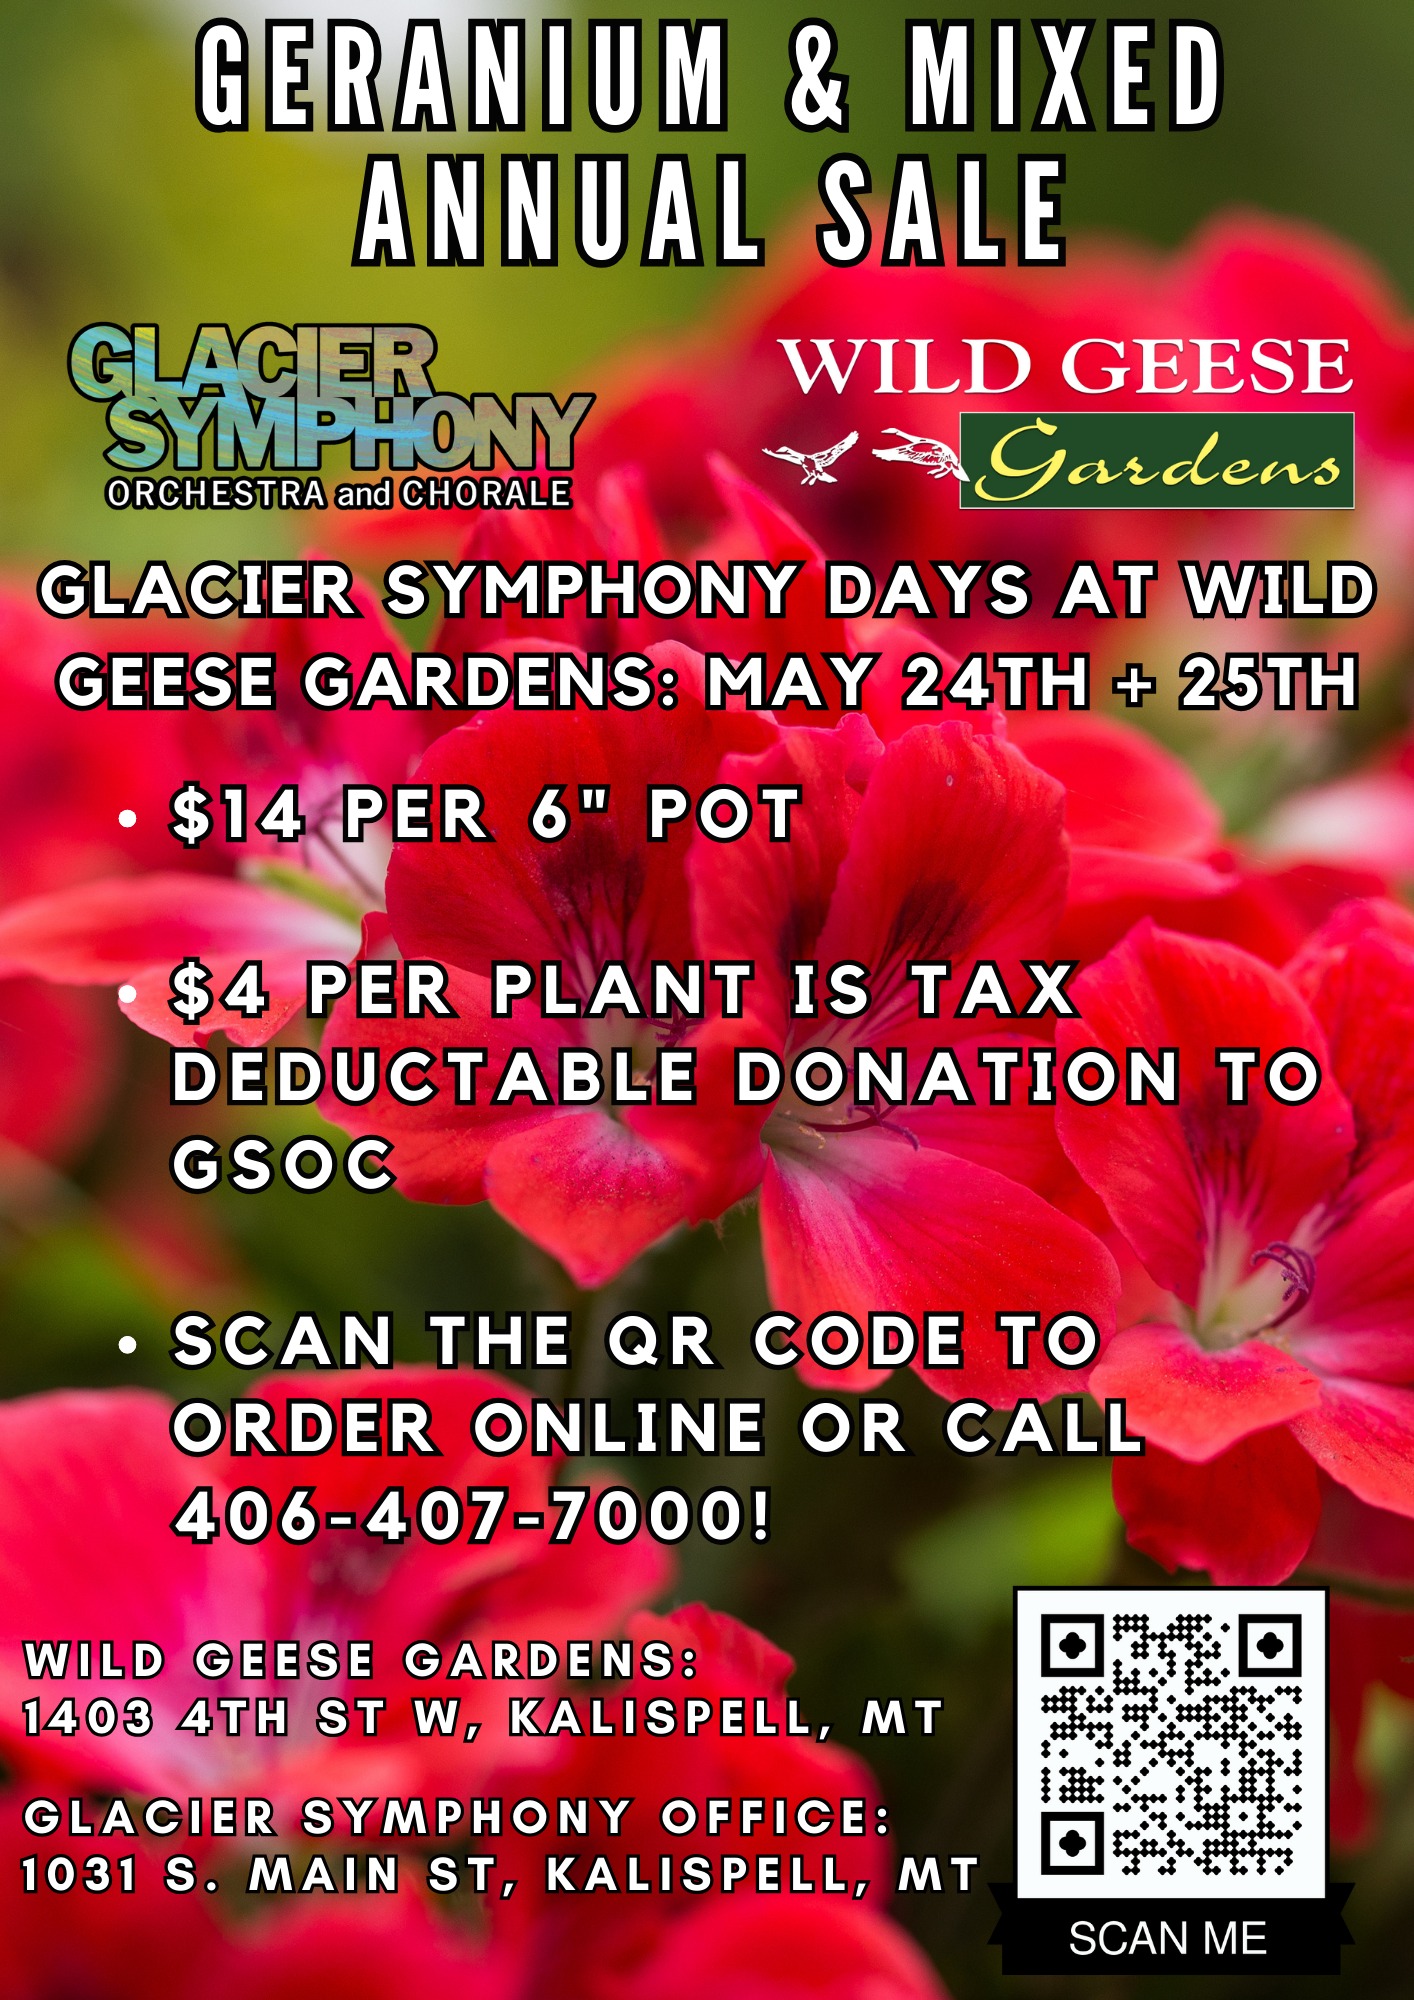 Annual flower Sale with Glacier Symphony Orchestra